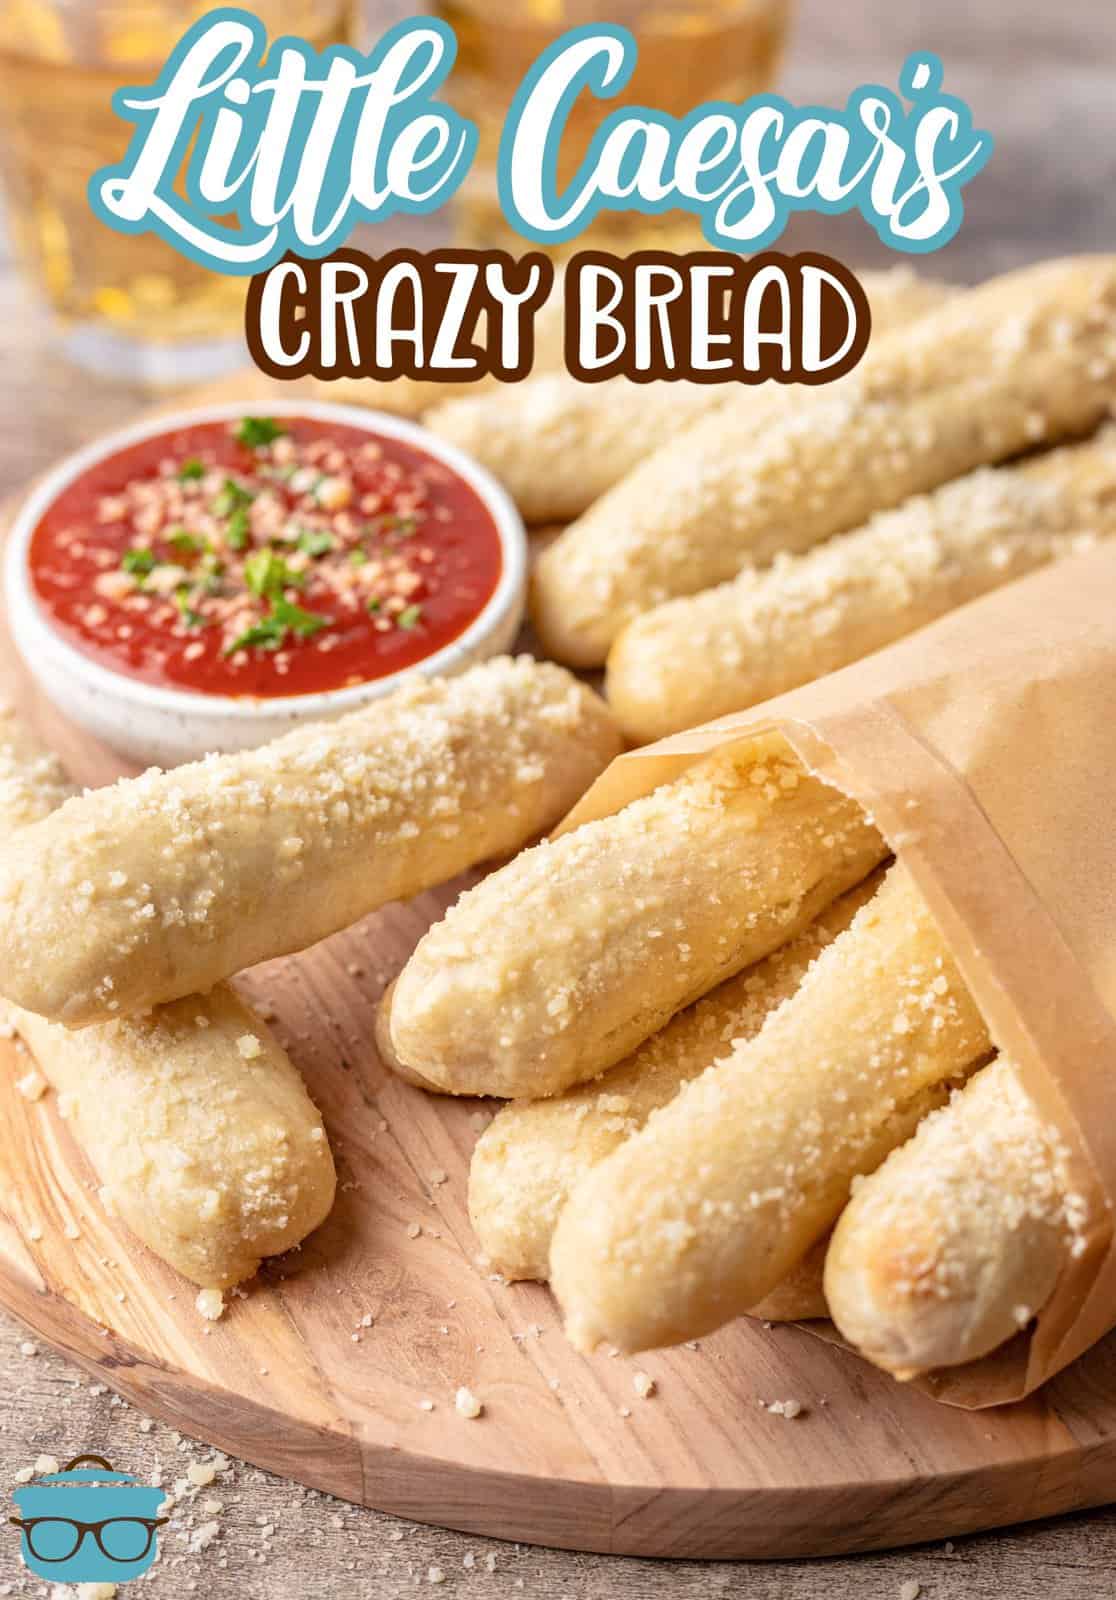 Pinterest image of Copycat Little Caesar's Crazy Bread on wooden board with dipping sauce.